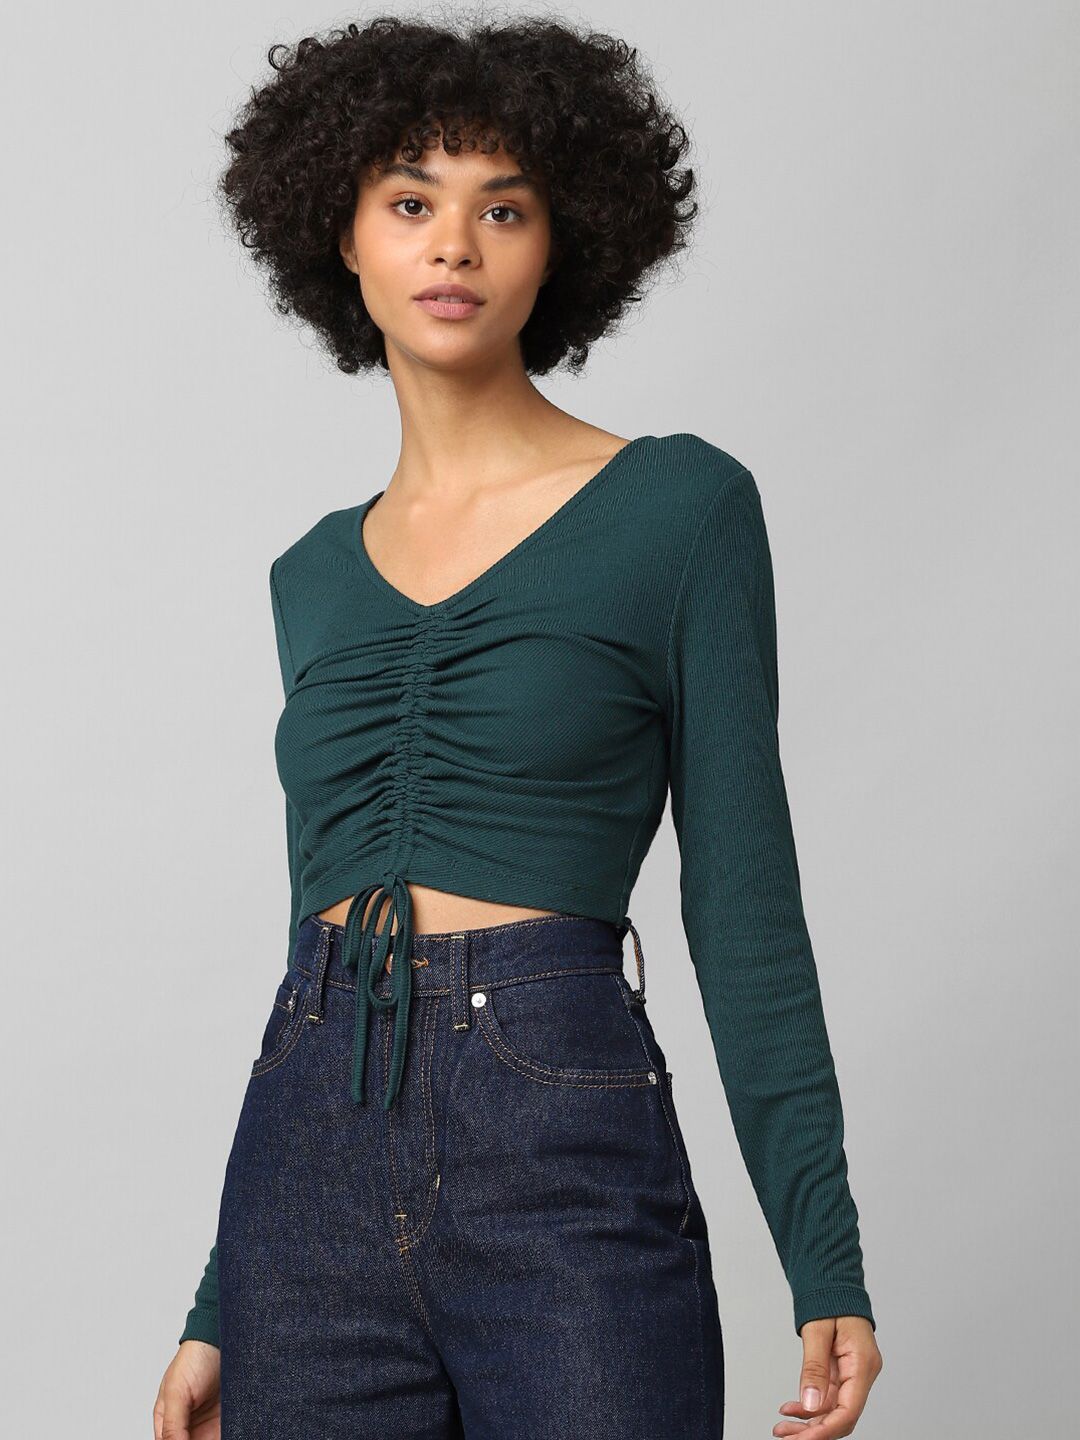 ONLY women's Green Crop Top Price in India